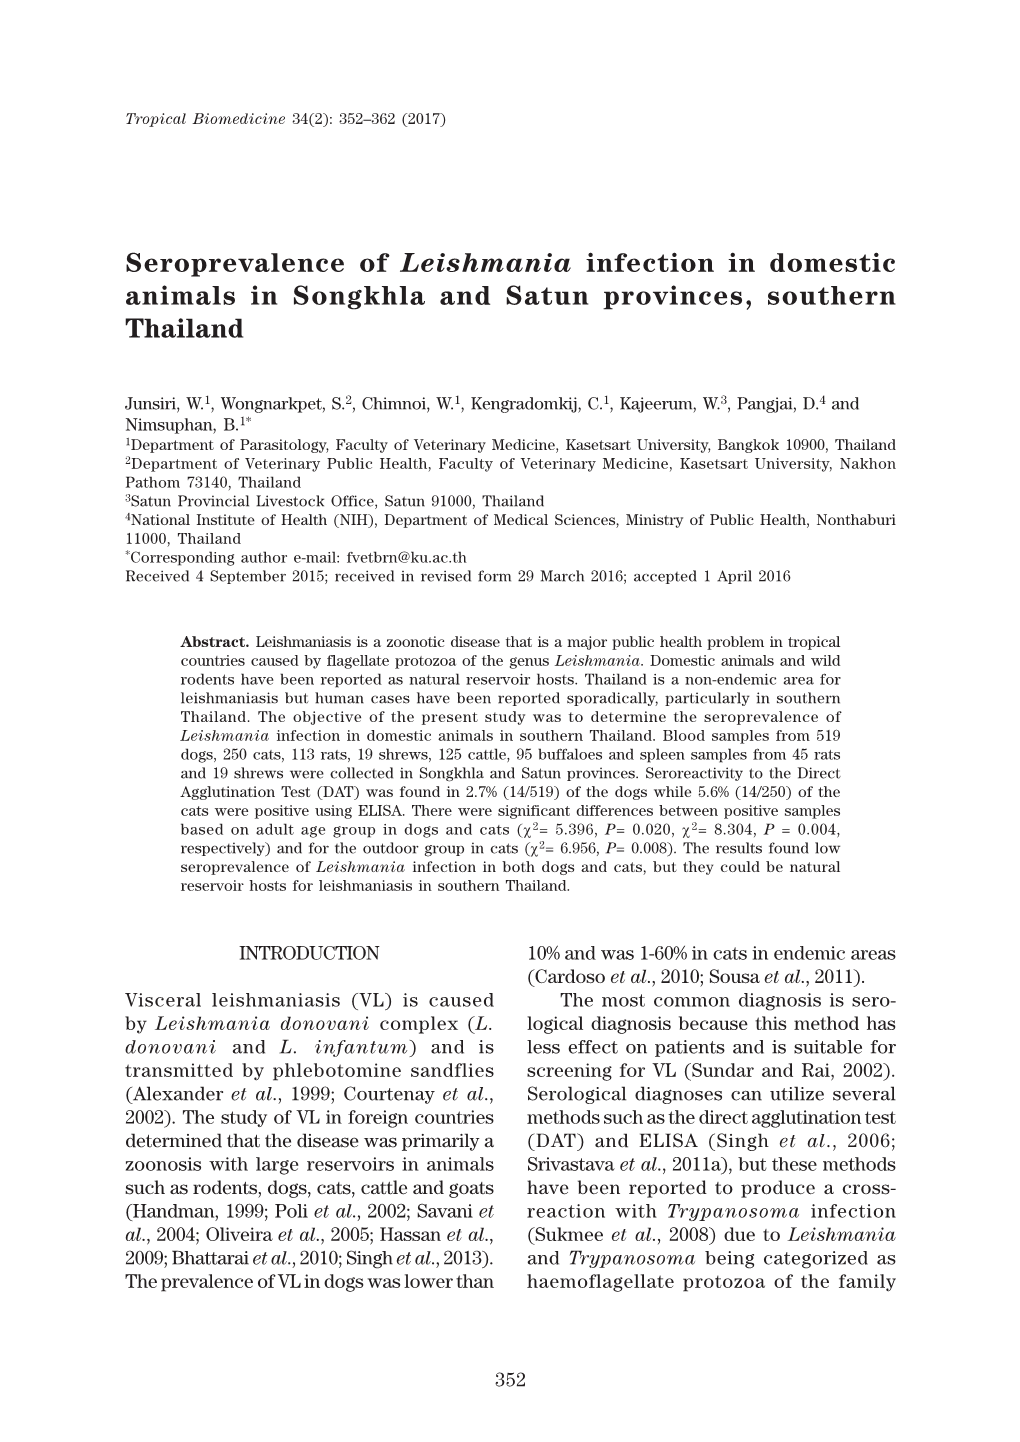 Seroprevalence of Leishmania Infection in Domestic Animals in Songkhla and Satun Provinces, Southern Thailand